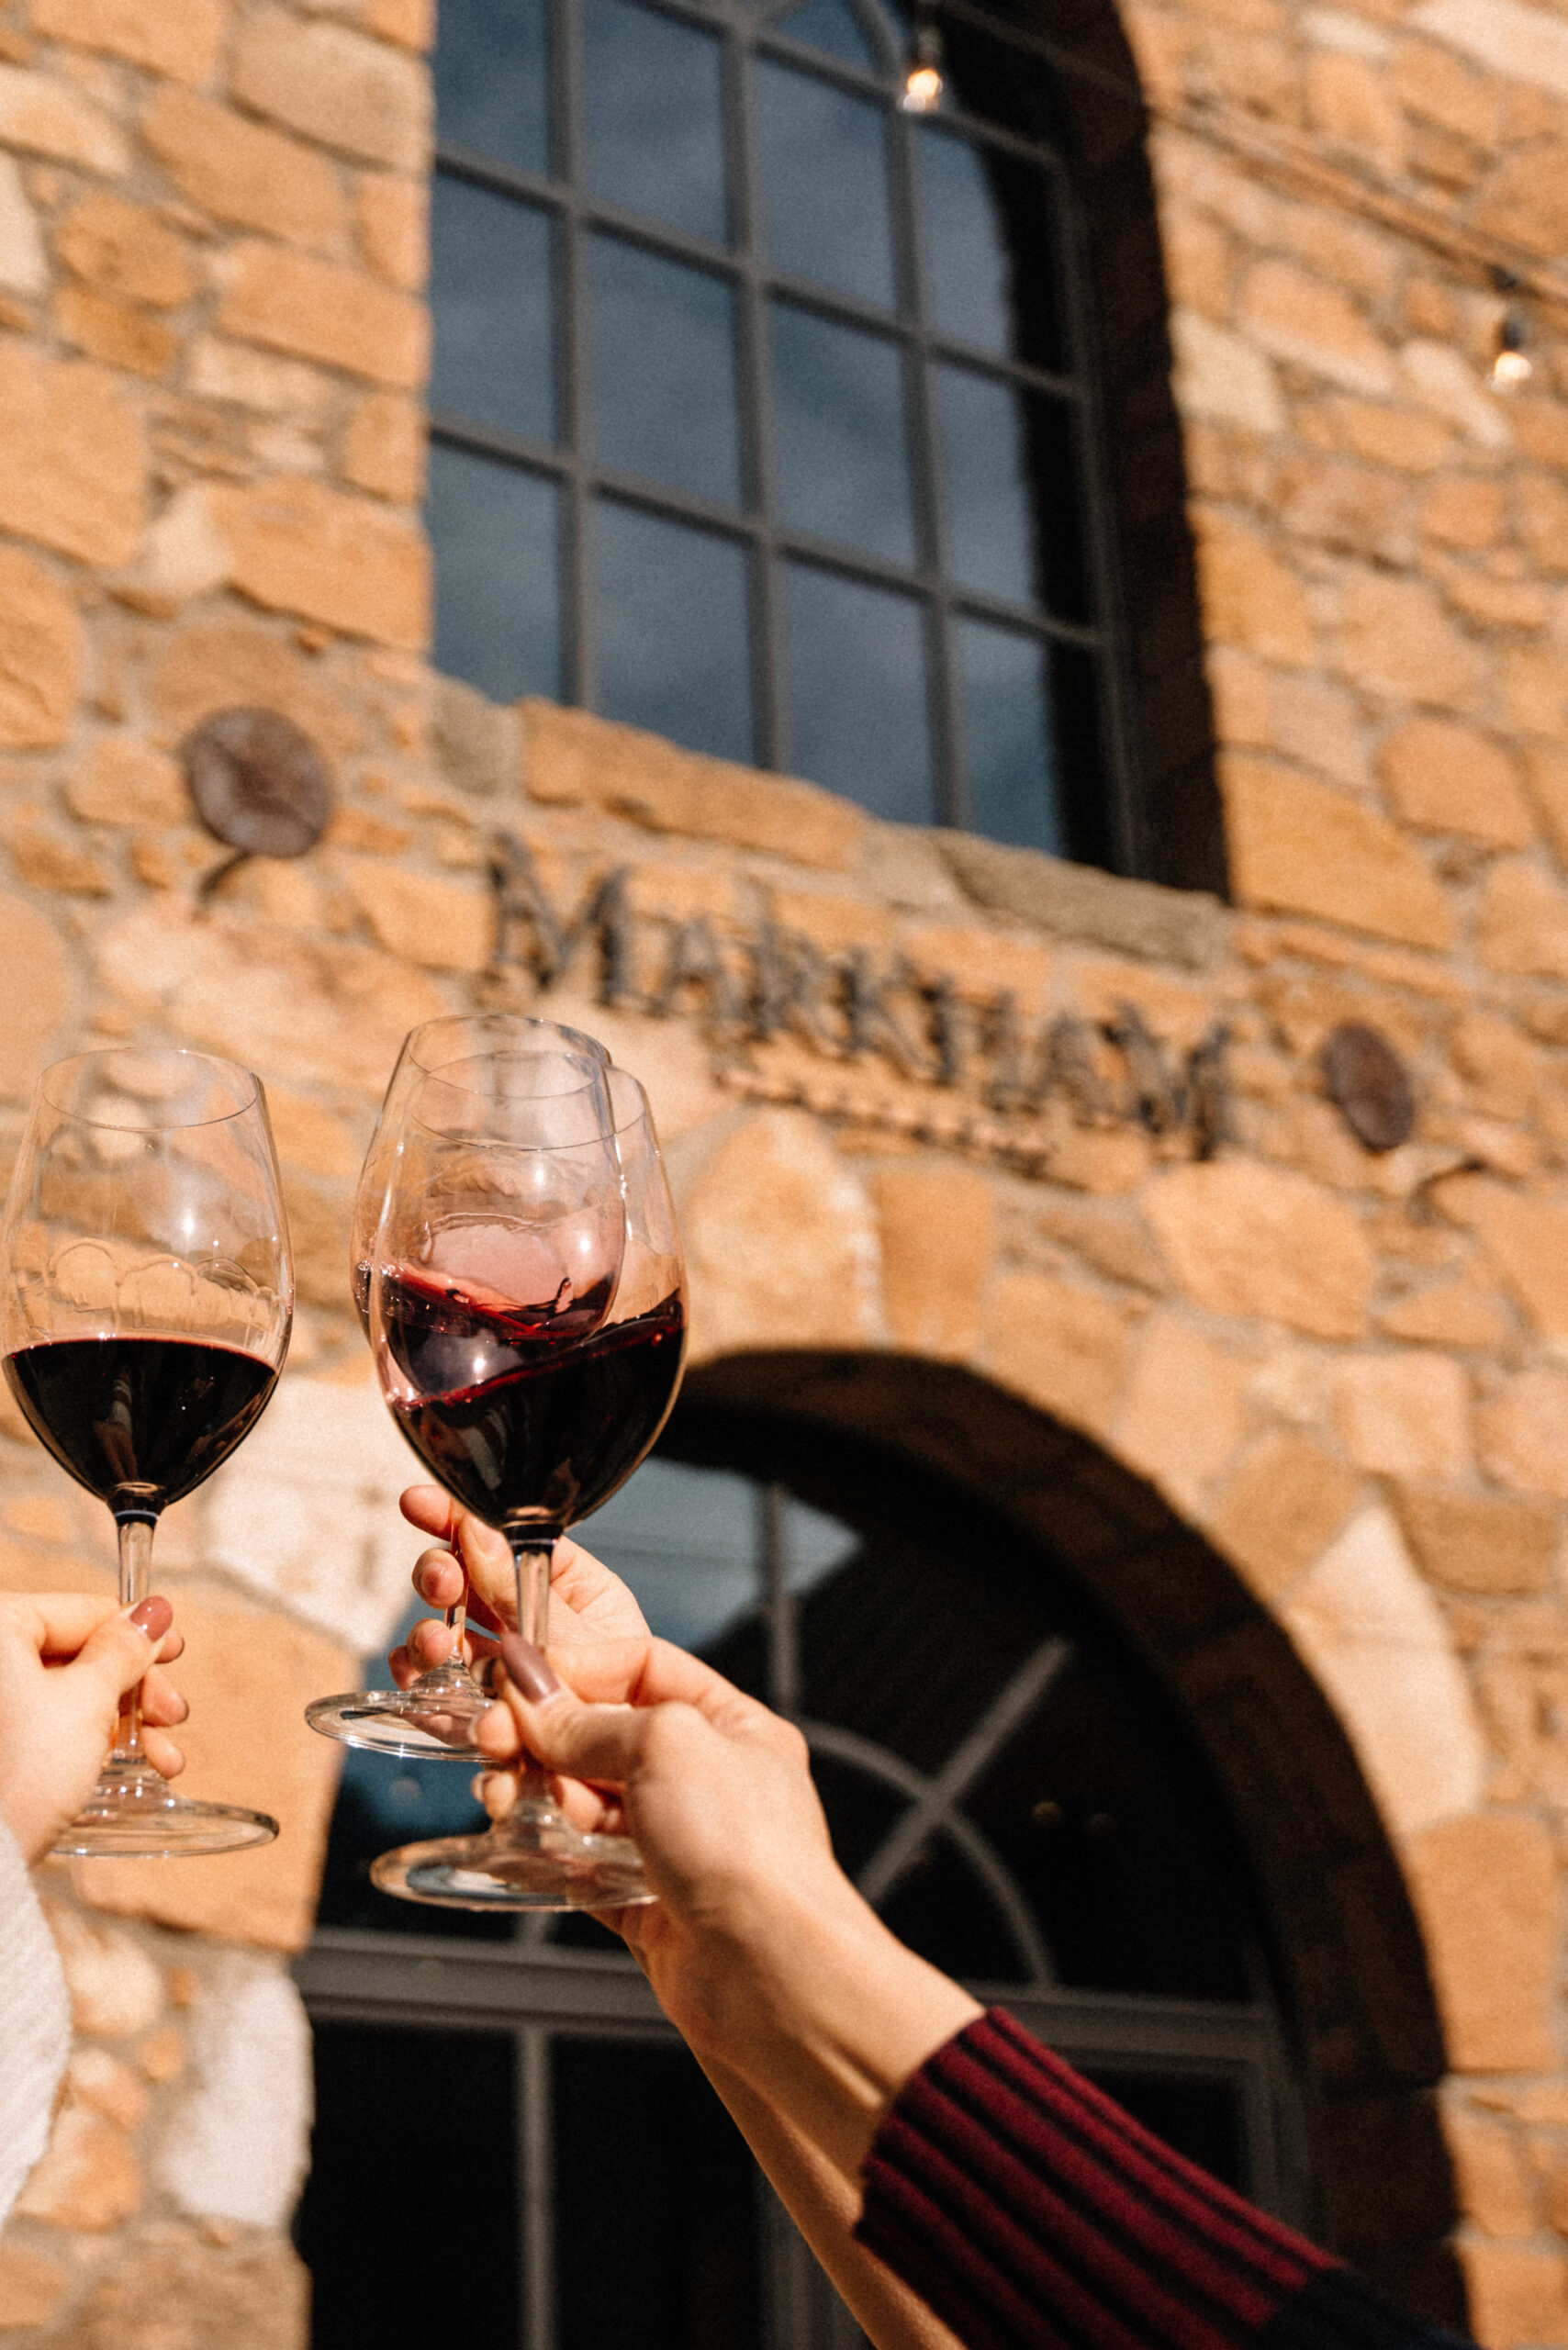 REd Wine Glasses toasting in front of the Markham Stone Cellar